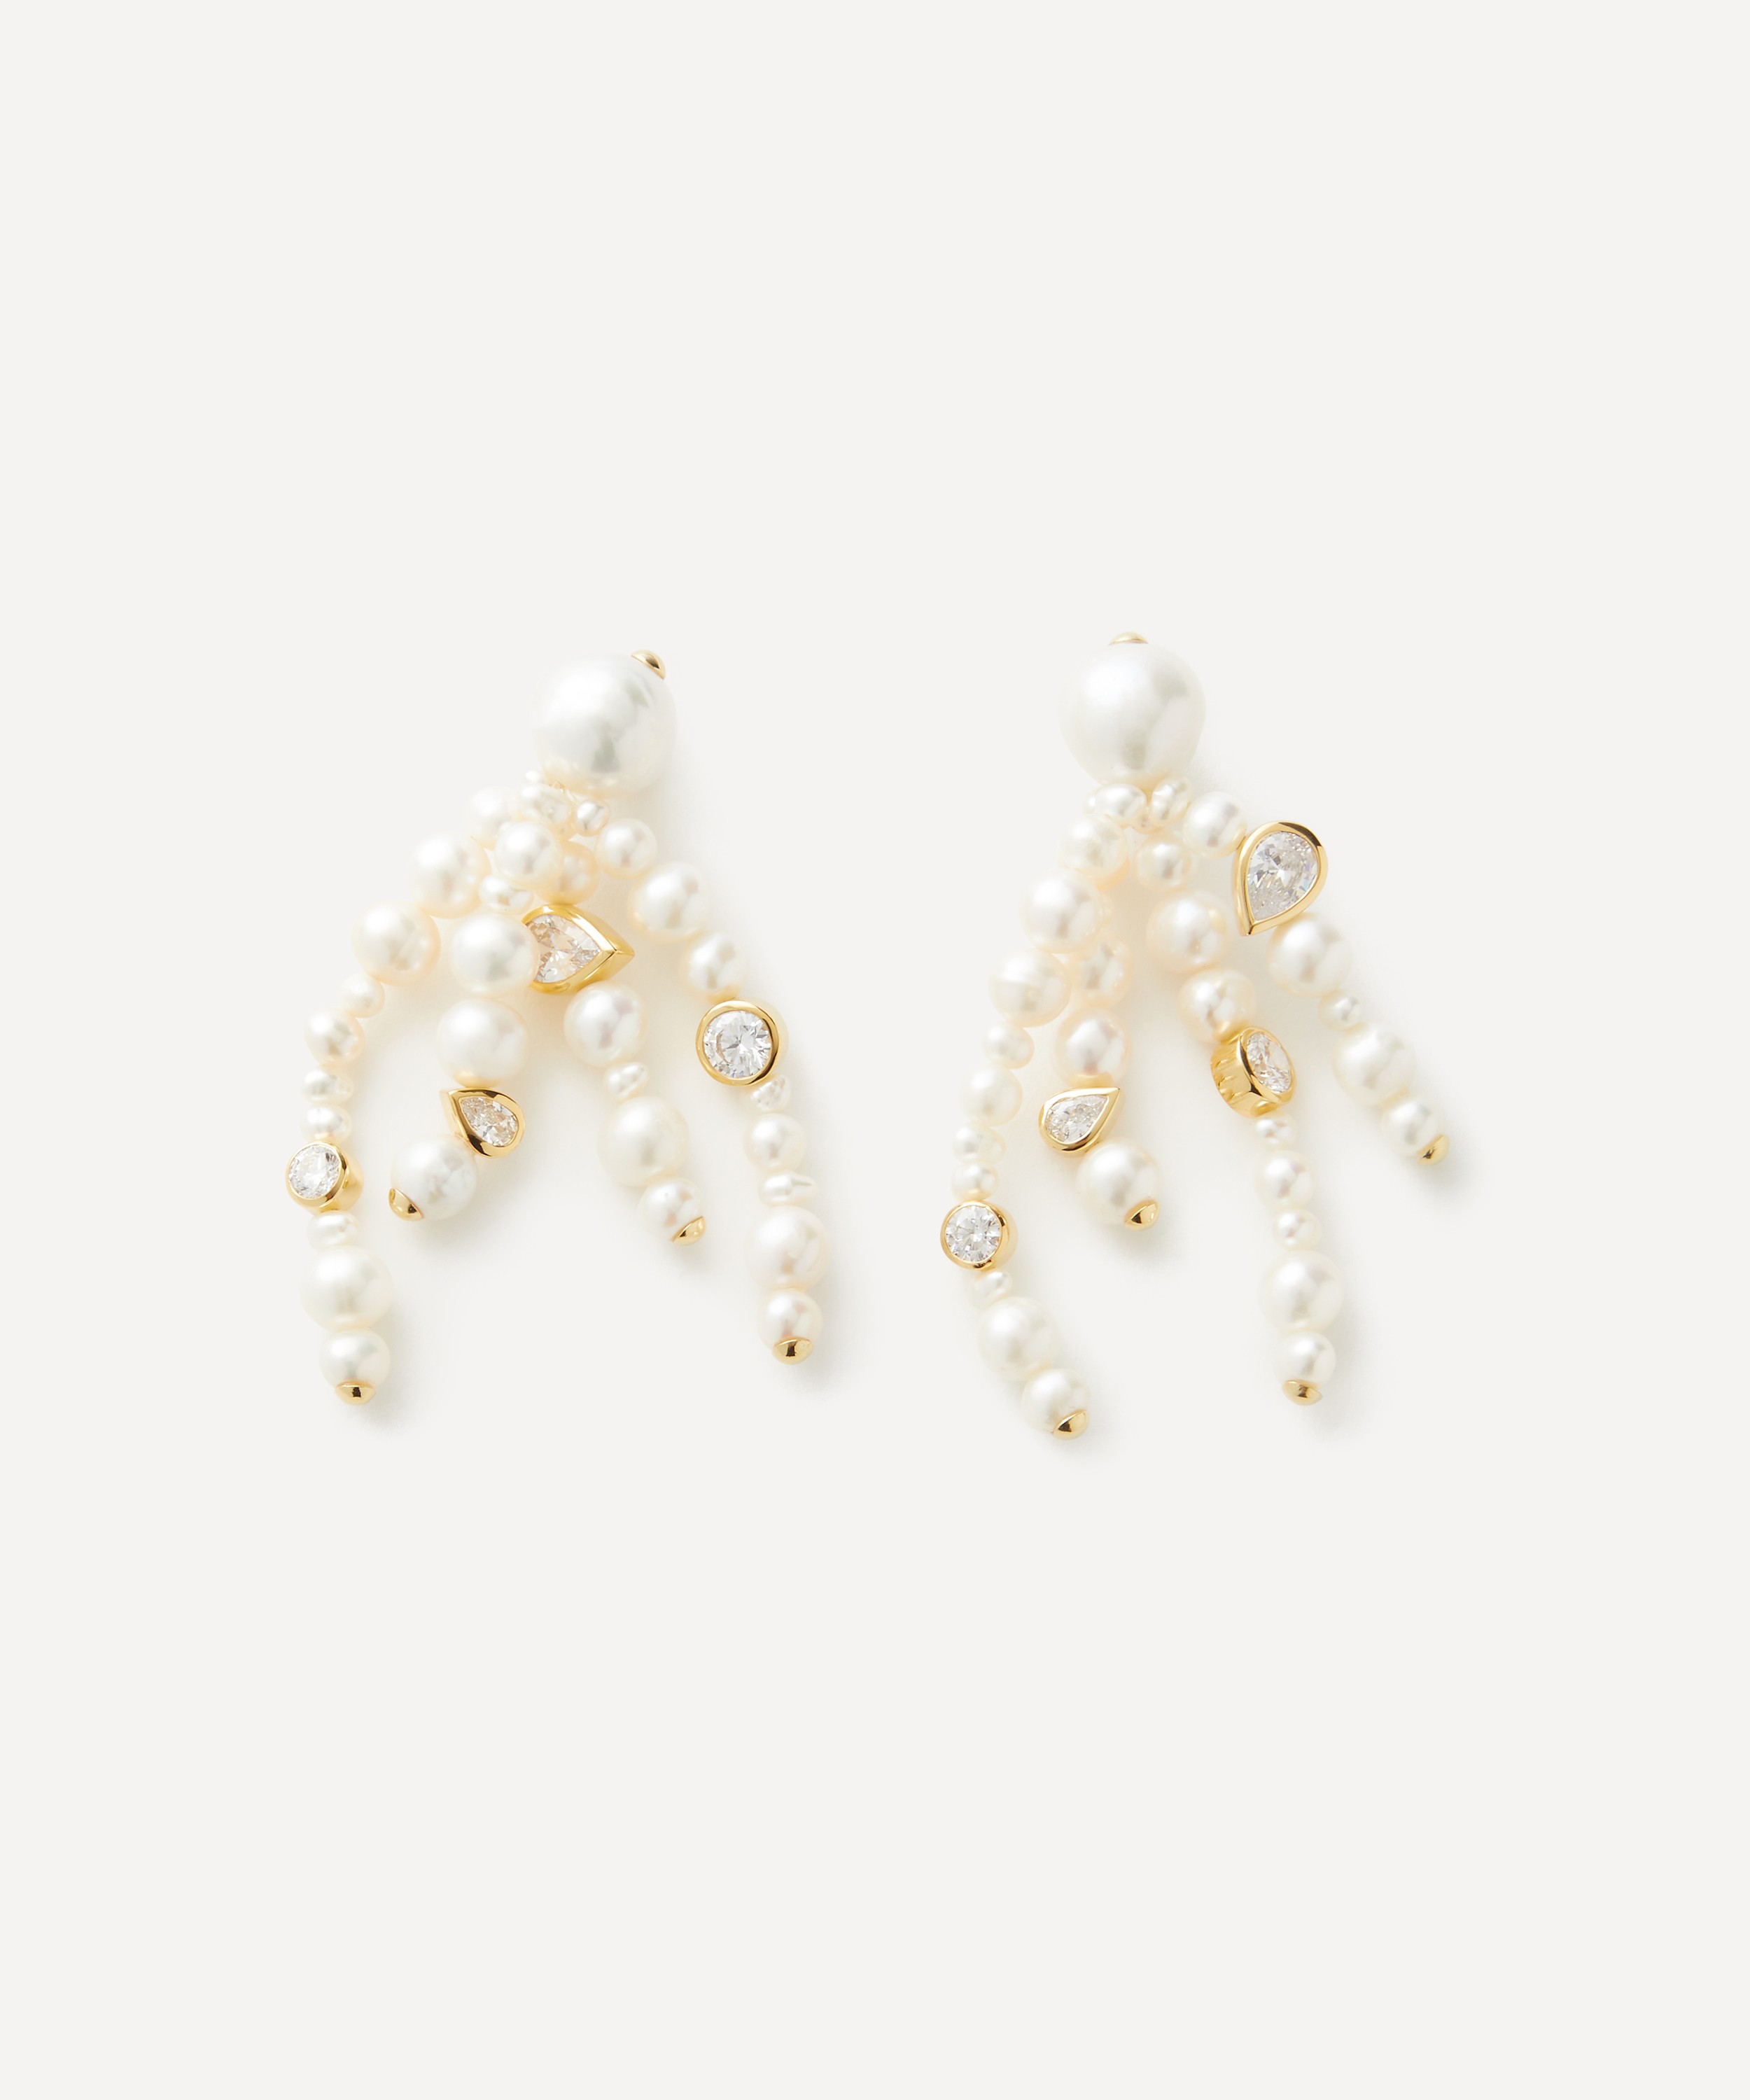 Completedworks - 18ct Gold-Plated Vermeil Silver Pearl Drop Earrings